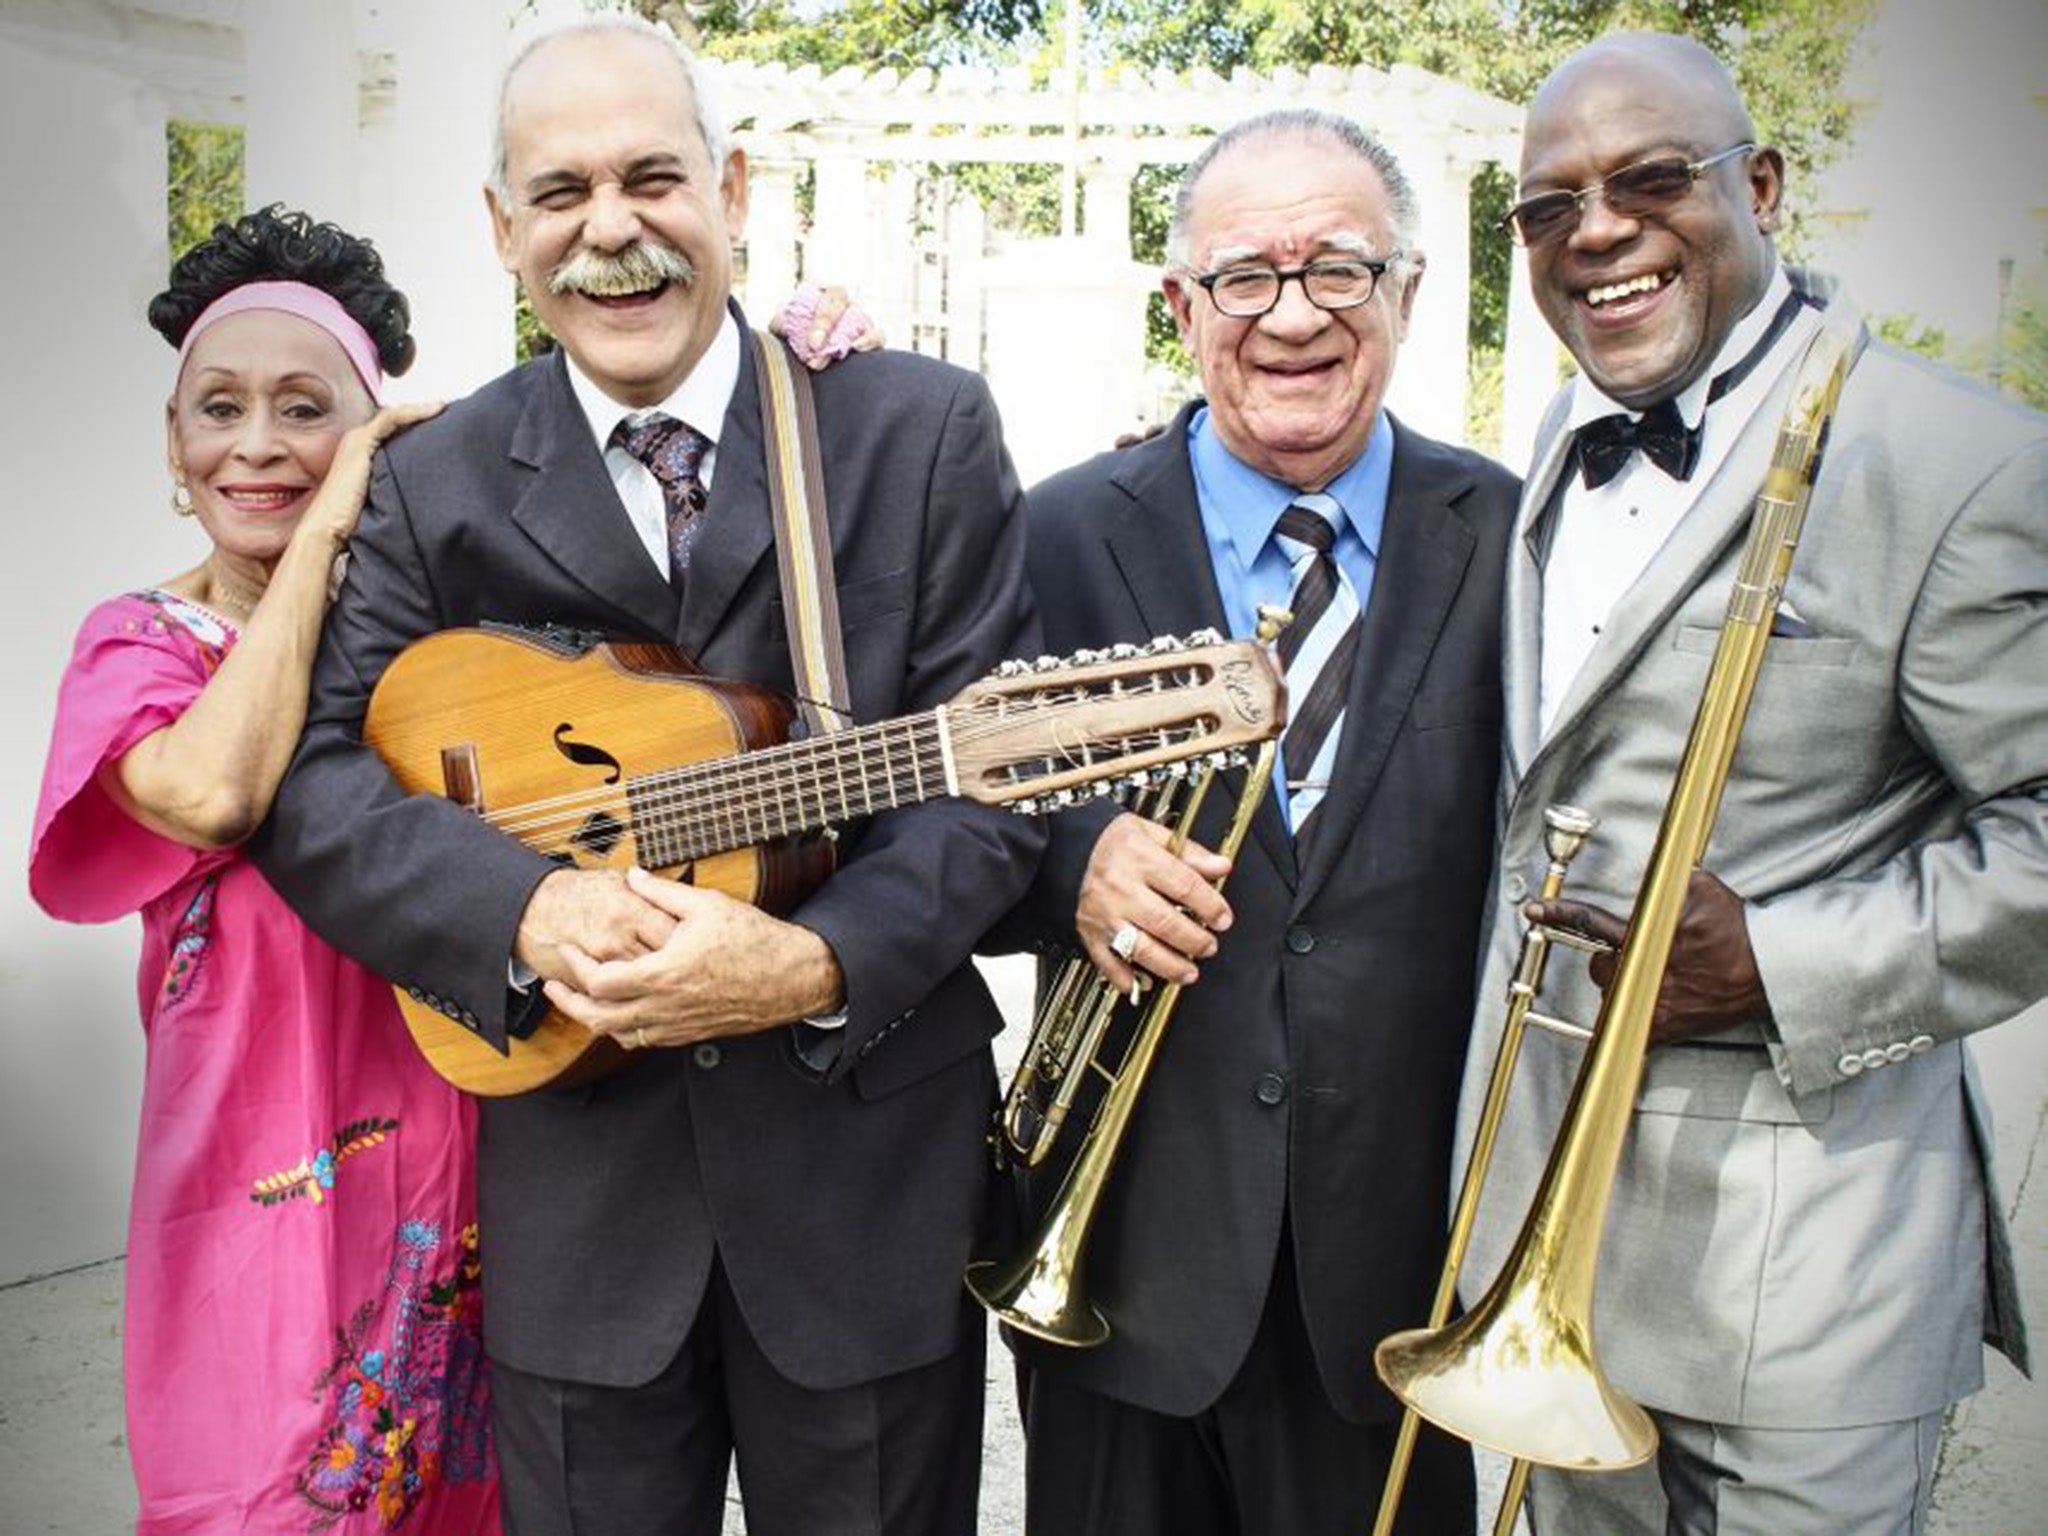 Buena Vista Social Club: The world music stars preparing to say 'Hasta la  vista' | The Independent | The Independent